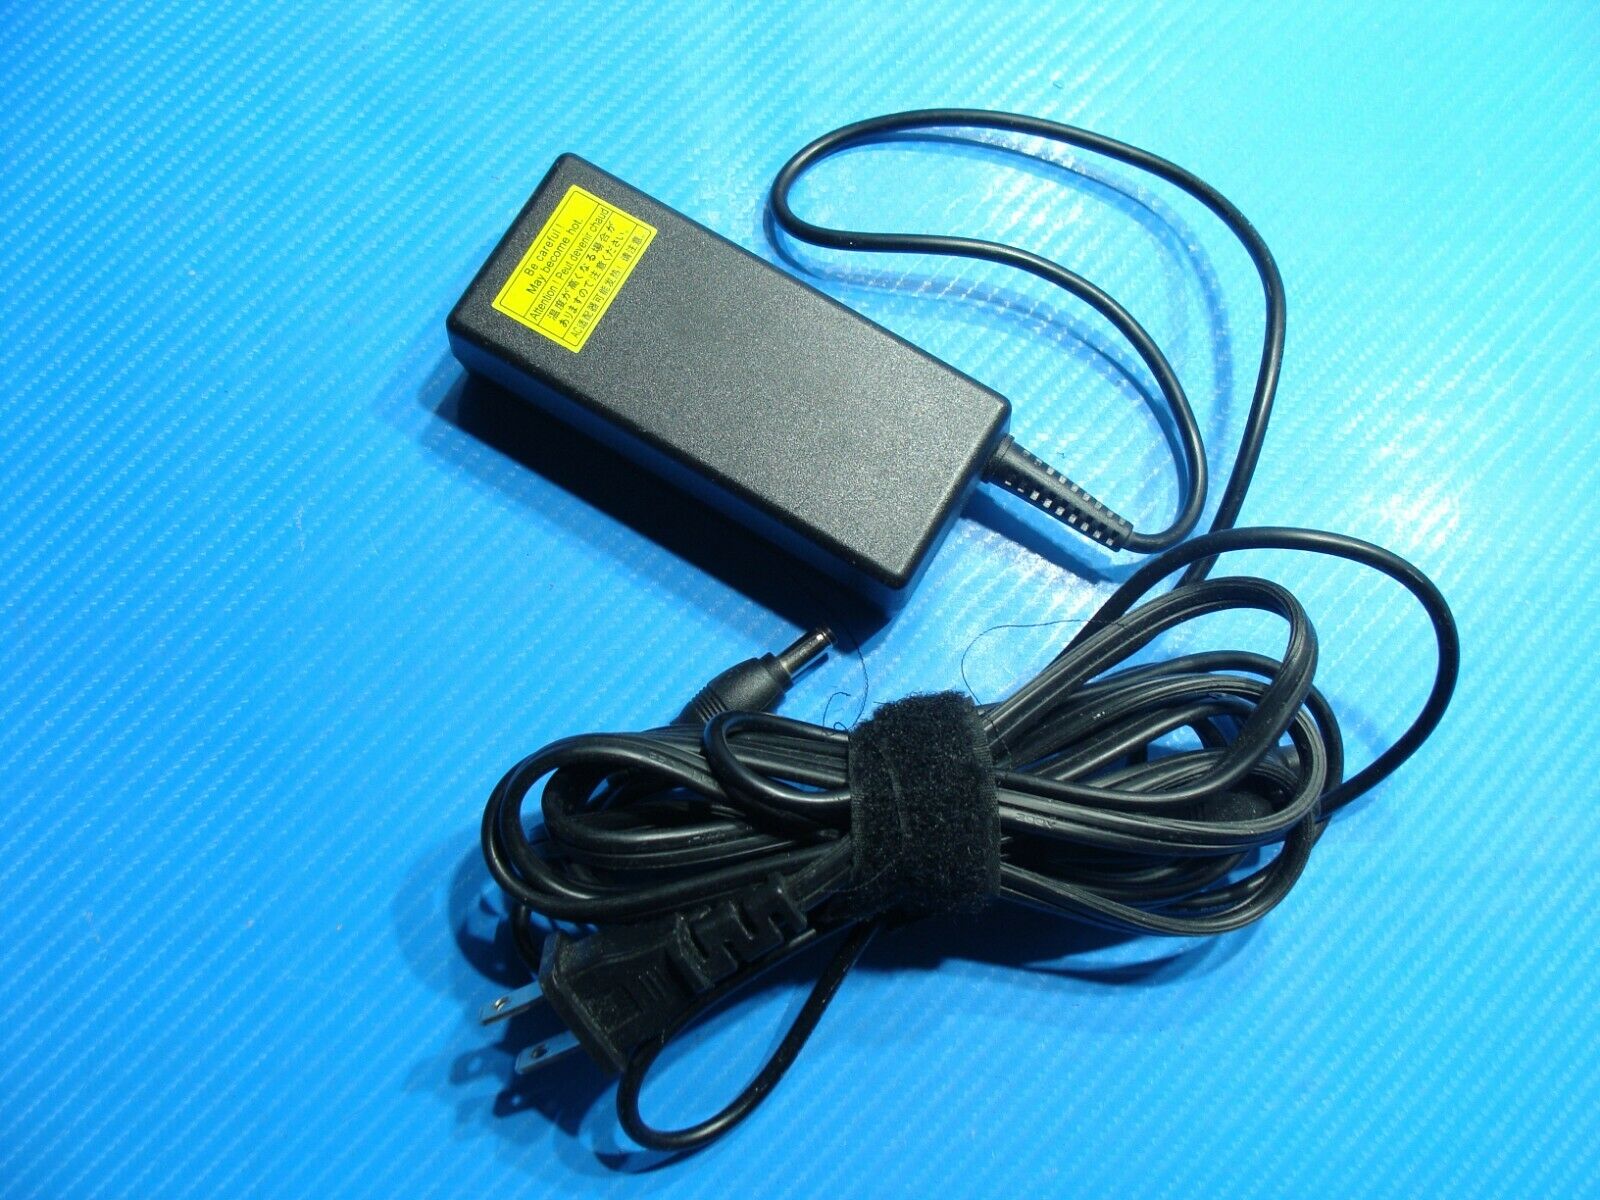 Genuine Toshiba AC Power Adapter Charger 65w P/N PA-1650-21 19v 3.42a Tip1.7*5.5 